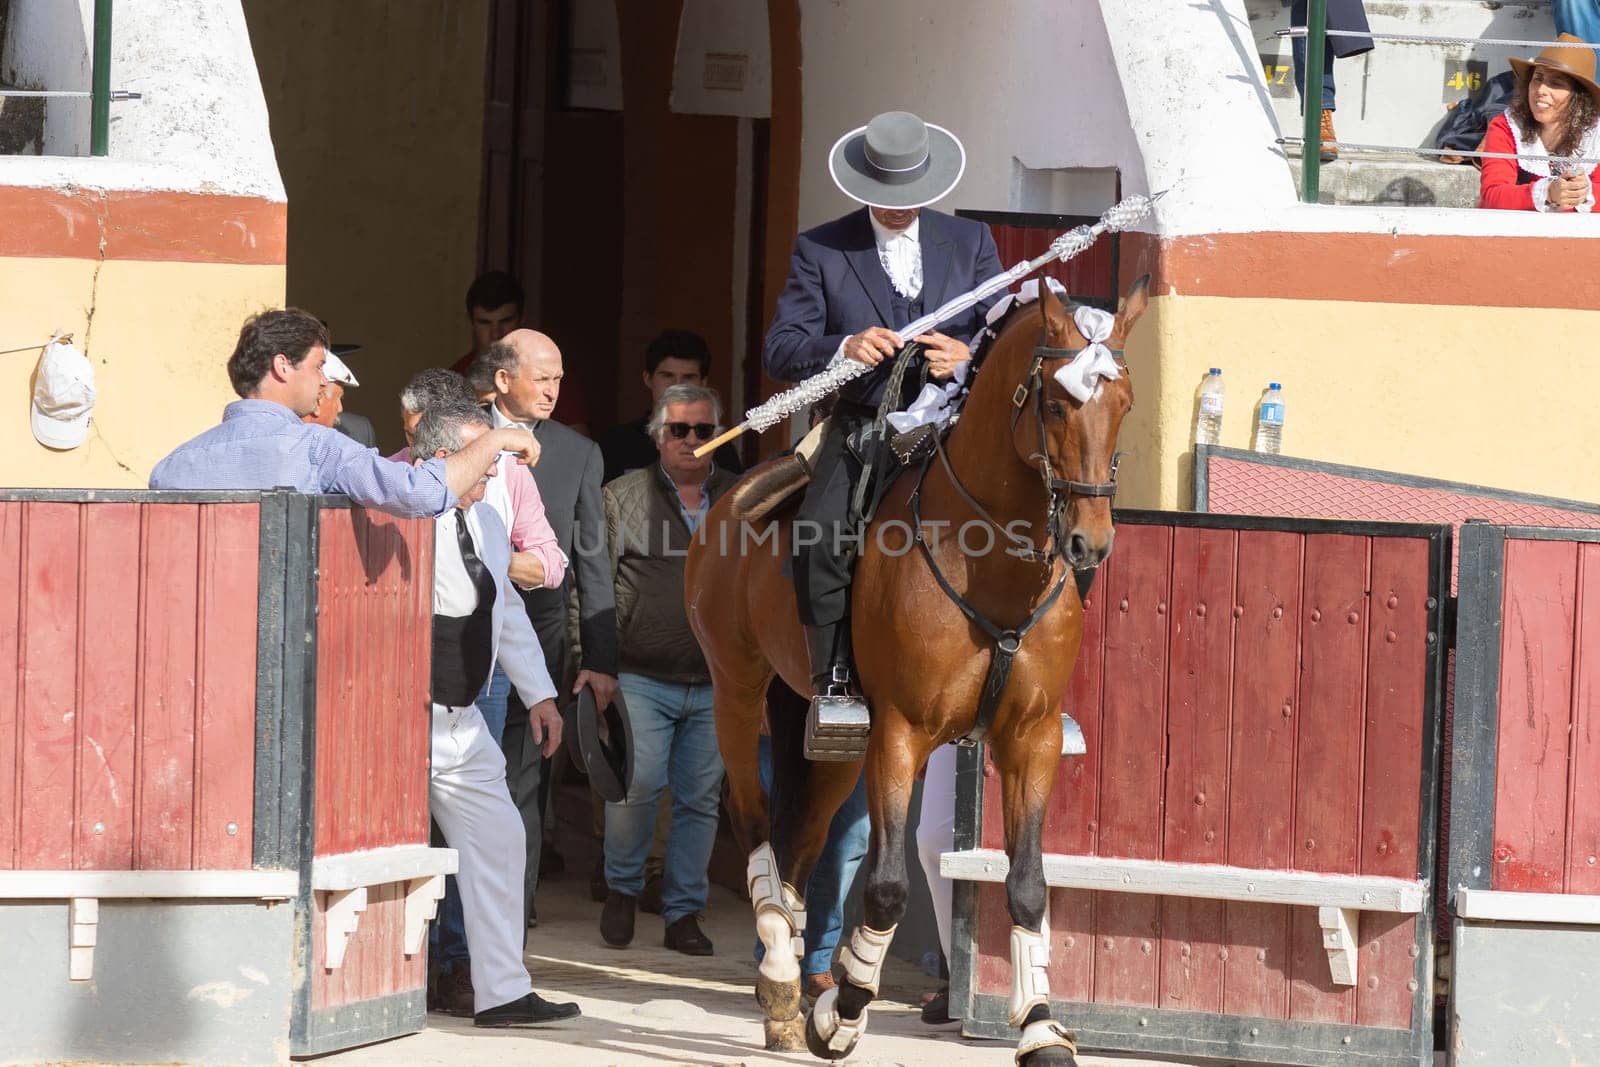 March 26, 2023 Lisbon, Portugal: Tourada - cavaleiro on horseback comes out of the paddock into the arena holding spear by Studia72